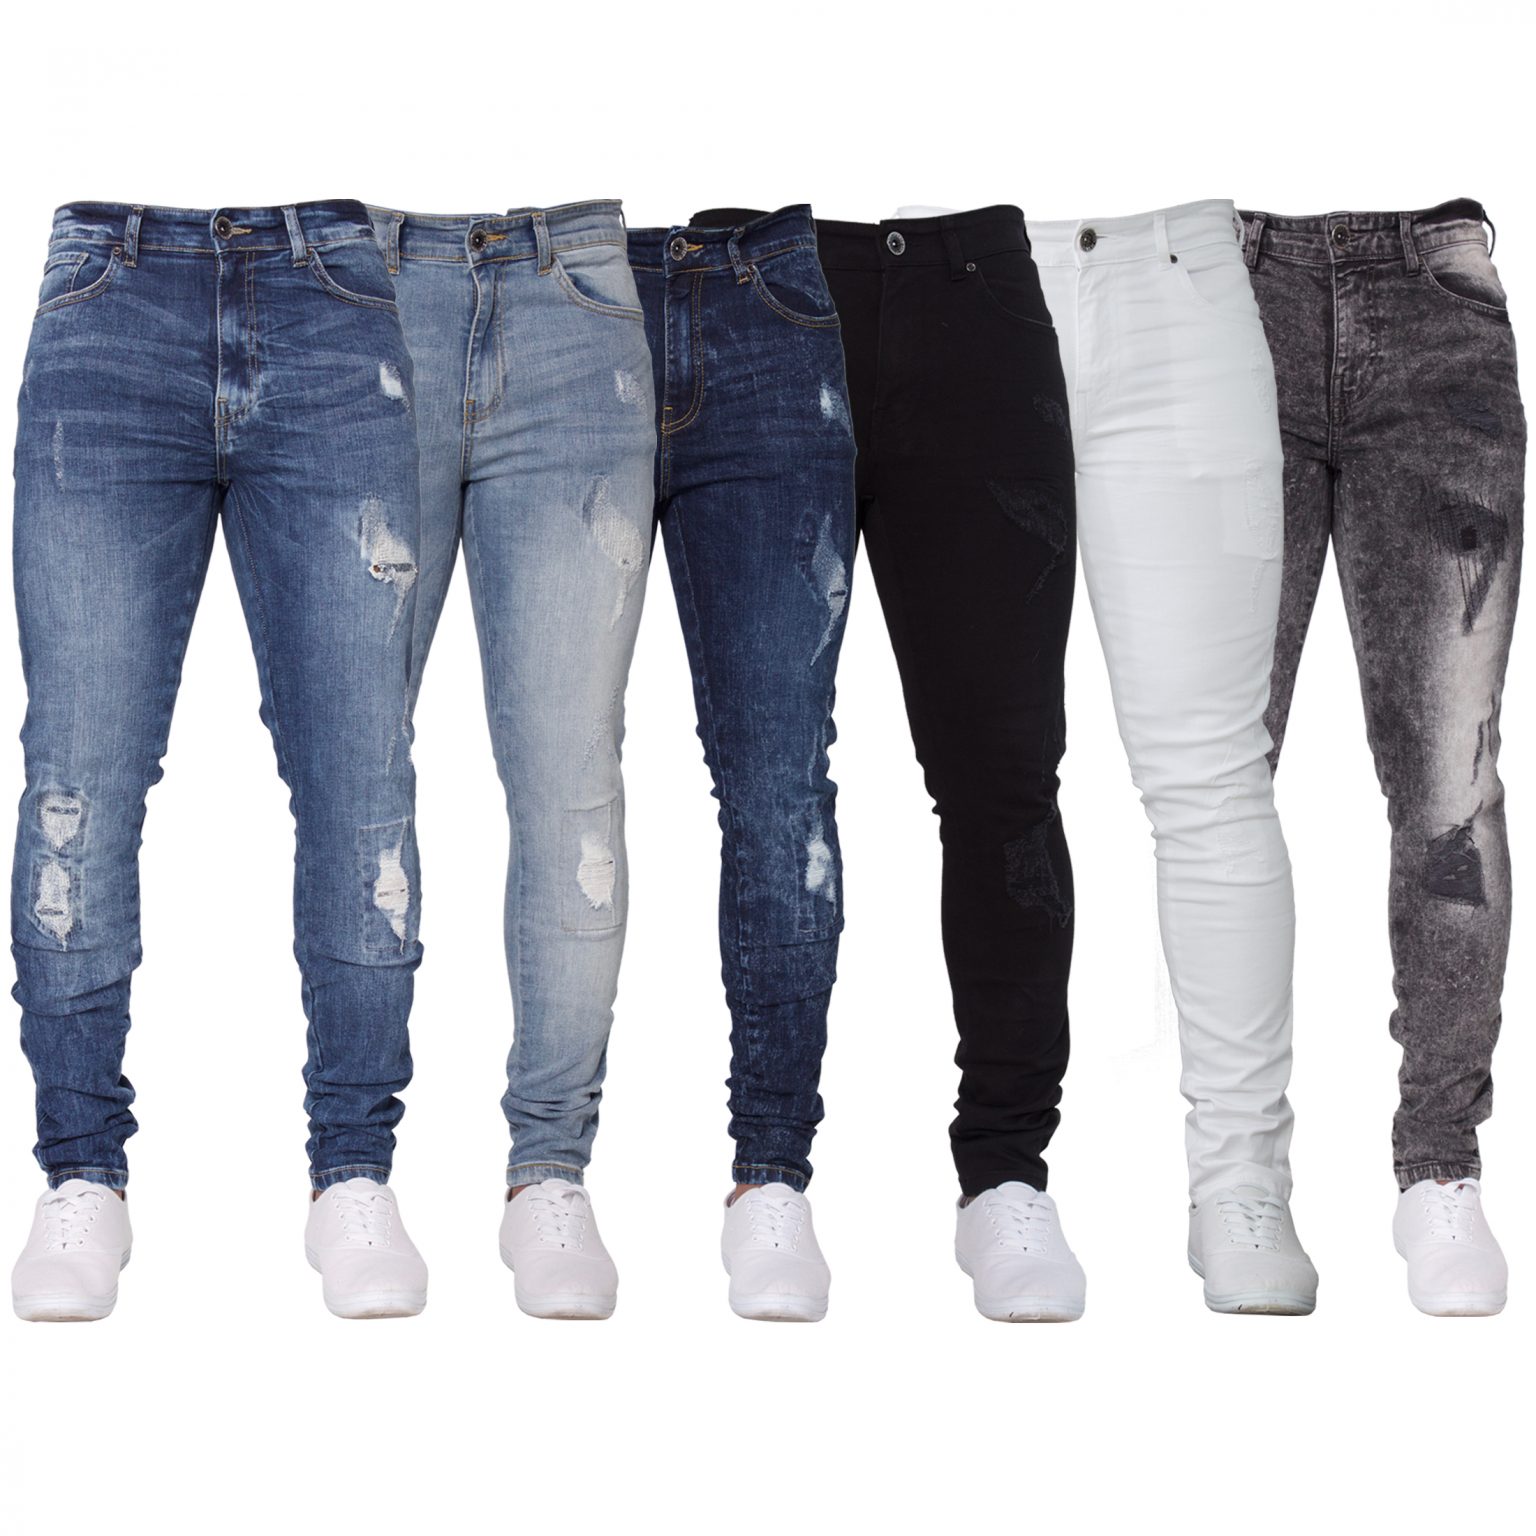 jeans from turkey wholesale….how to import | importing house